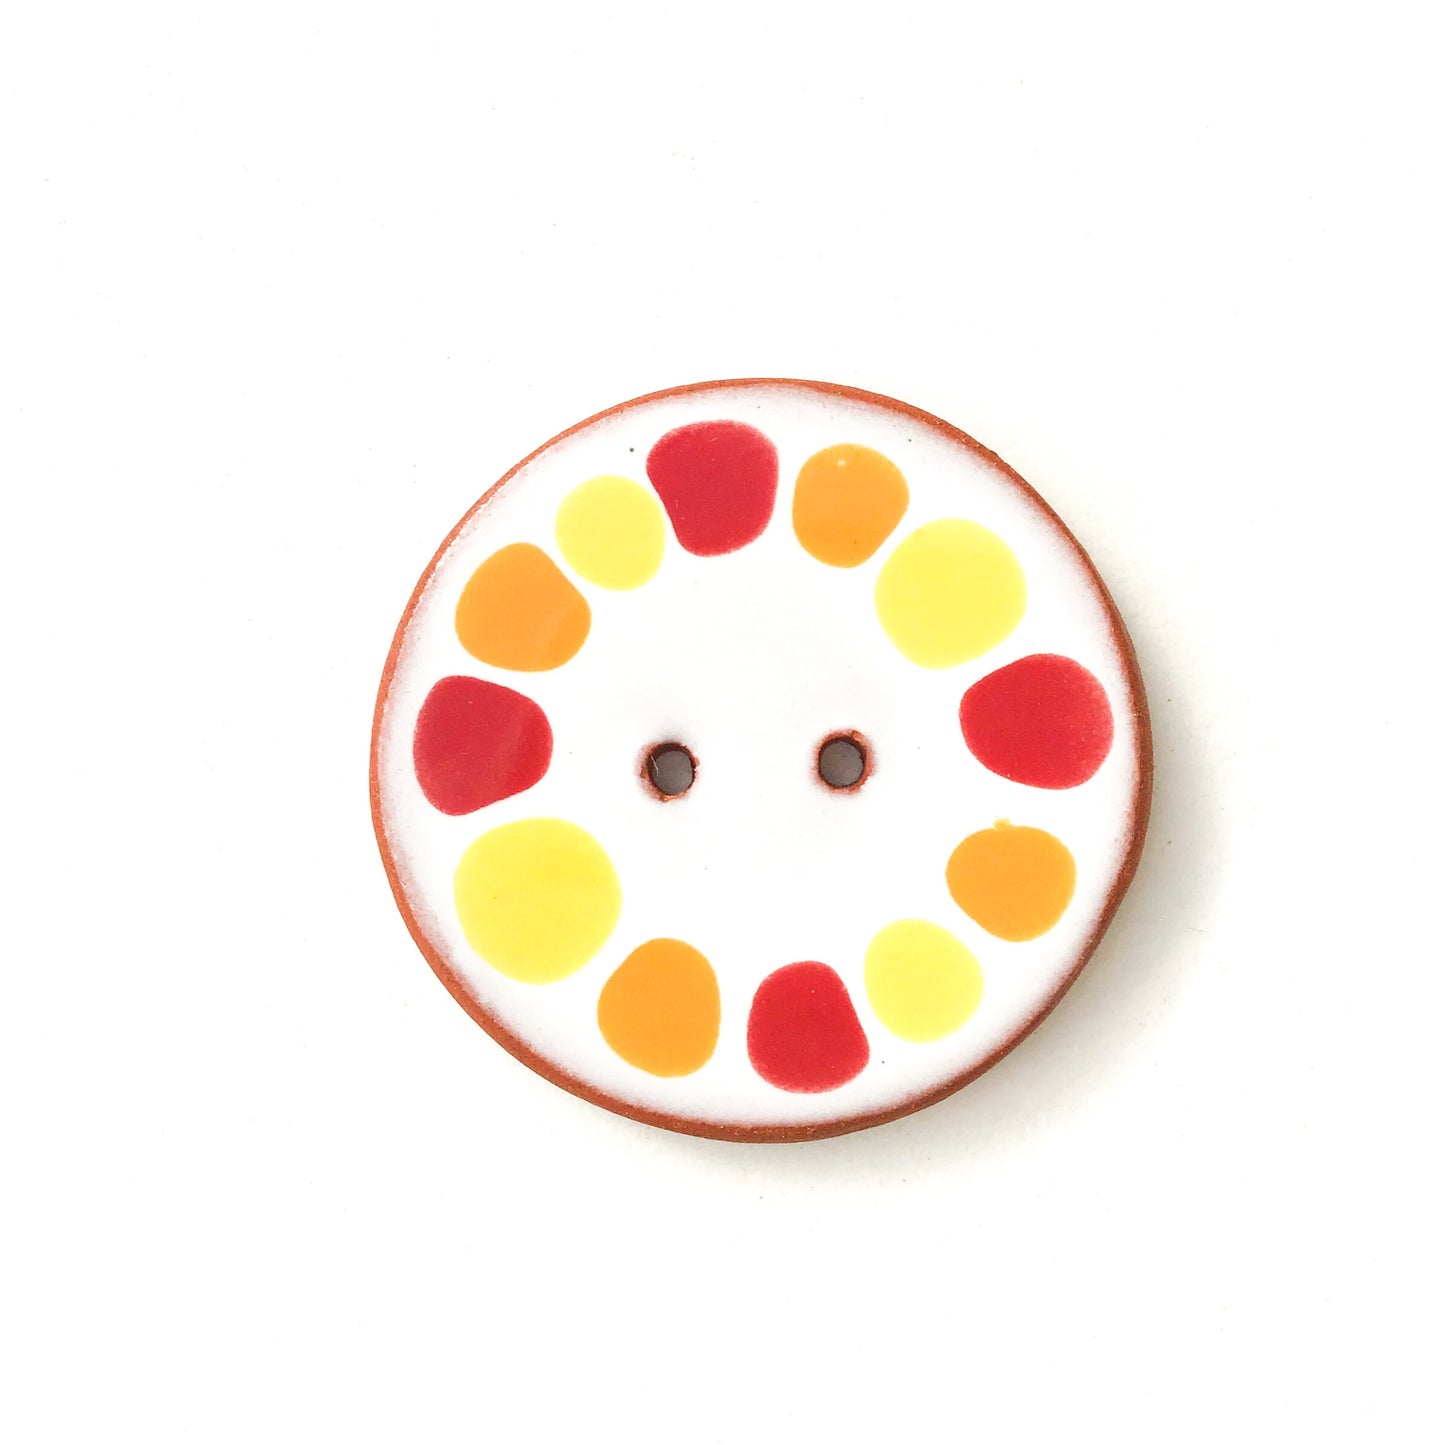 Colorful Dotted Buttons - Color Contrast Ceramic Buttons - 1 3/8" (ws-52)